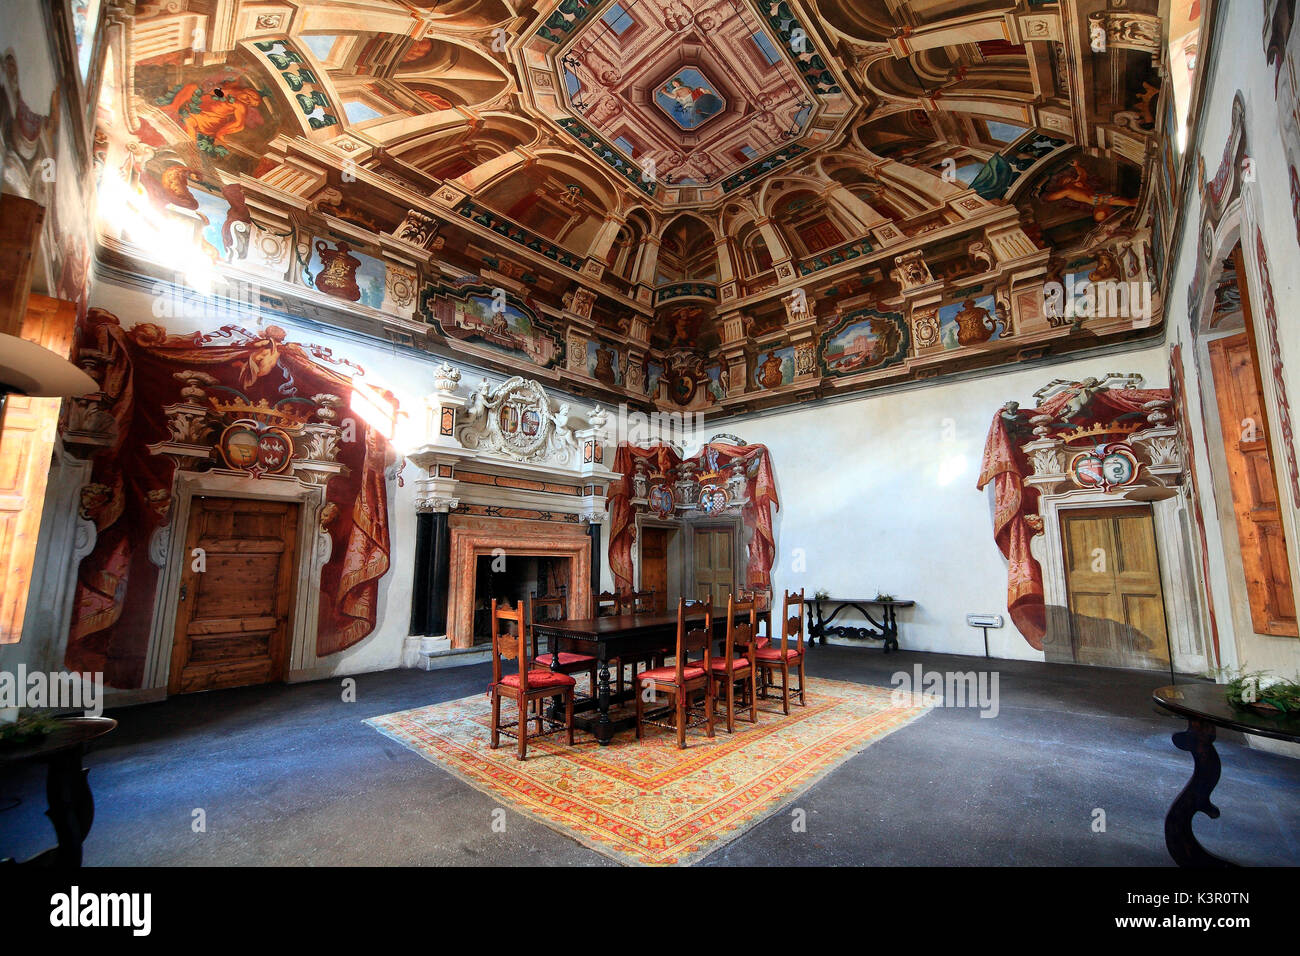 The 'Saloncello' (the Reading Hall) in the Sertoli Salis Palace, which shows one of the most relevant decorations with an interesting frescoed ceiling and a Baroque fireplace with plasterwork decorations representing the Salis and Wolkenstein coats of arms - Tirano, Valtellina, Lombardy Italy Europe Stock Photo